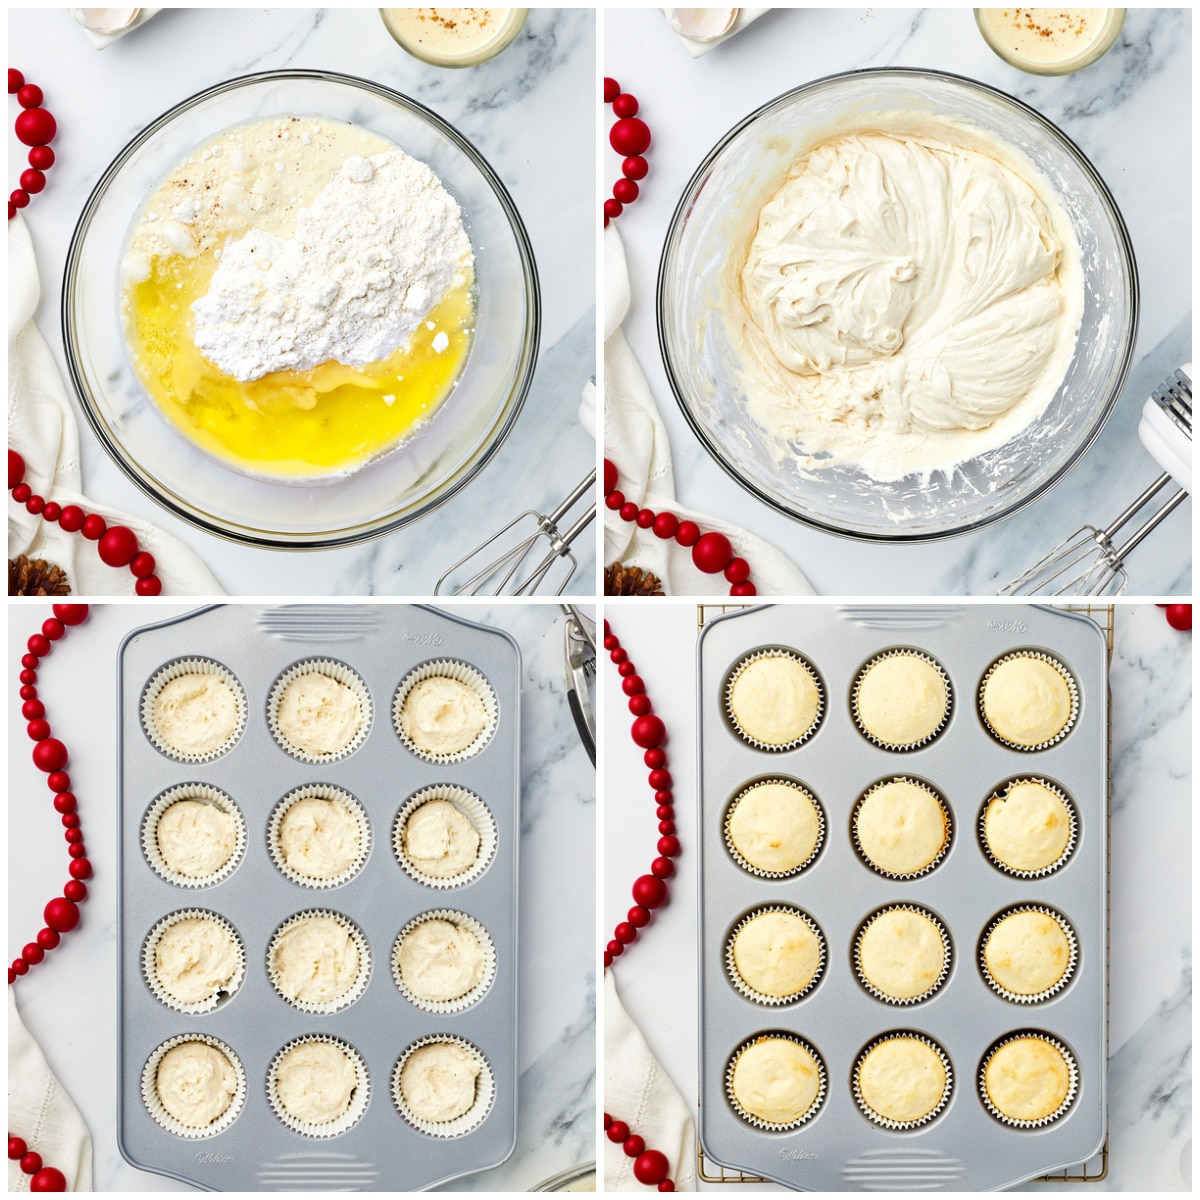 Step by step photos on how to make the cupcakes.